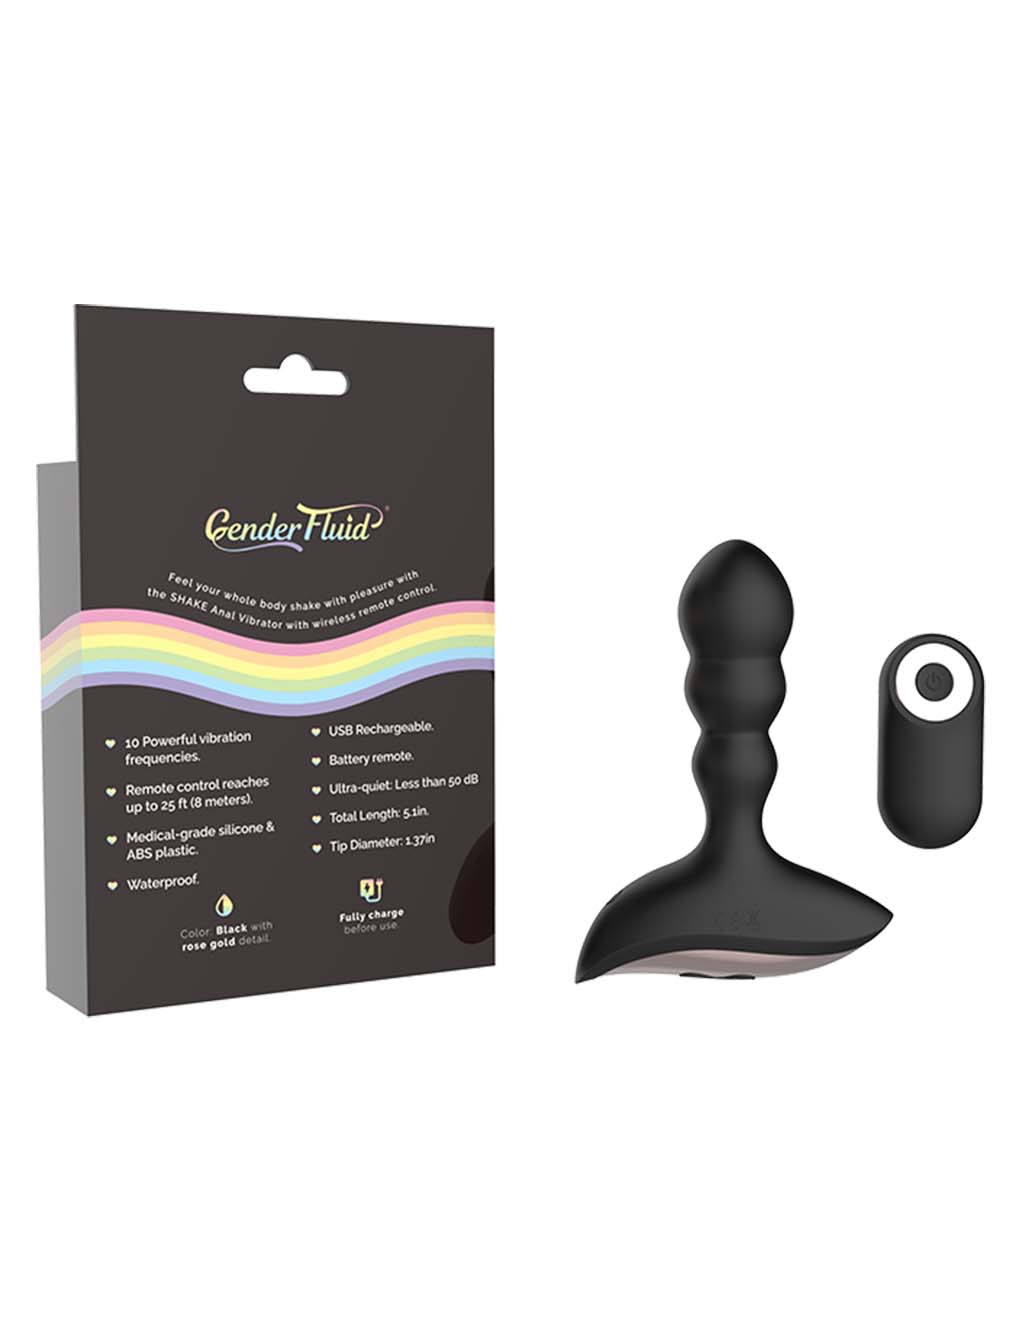 Gender Fluid Shake Anal Vibe - Toy with Back of Box